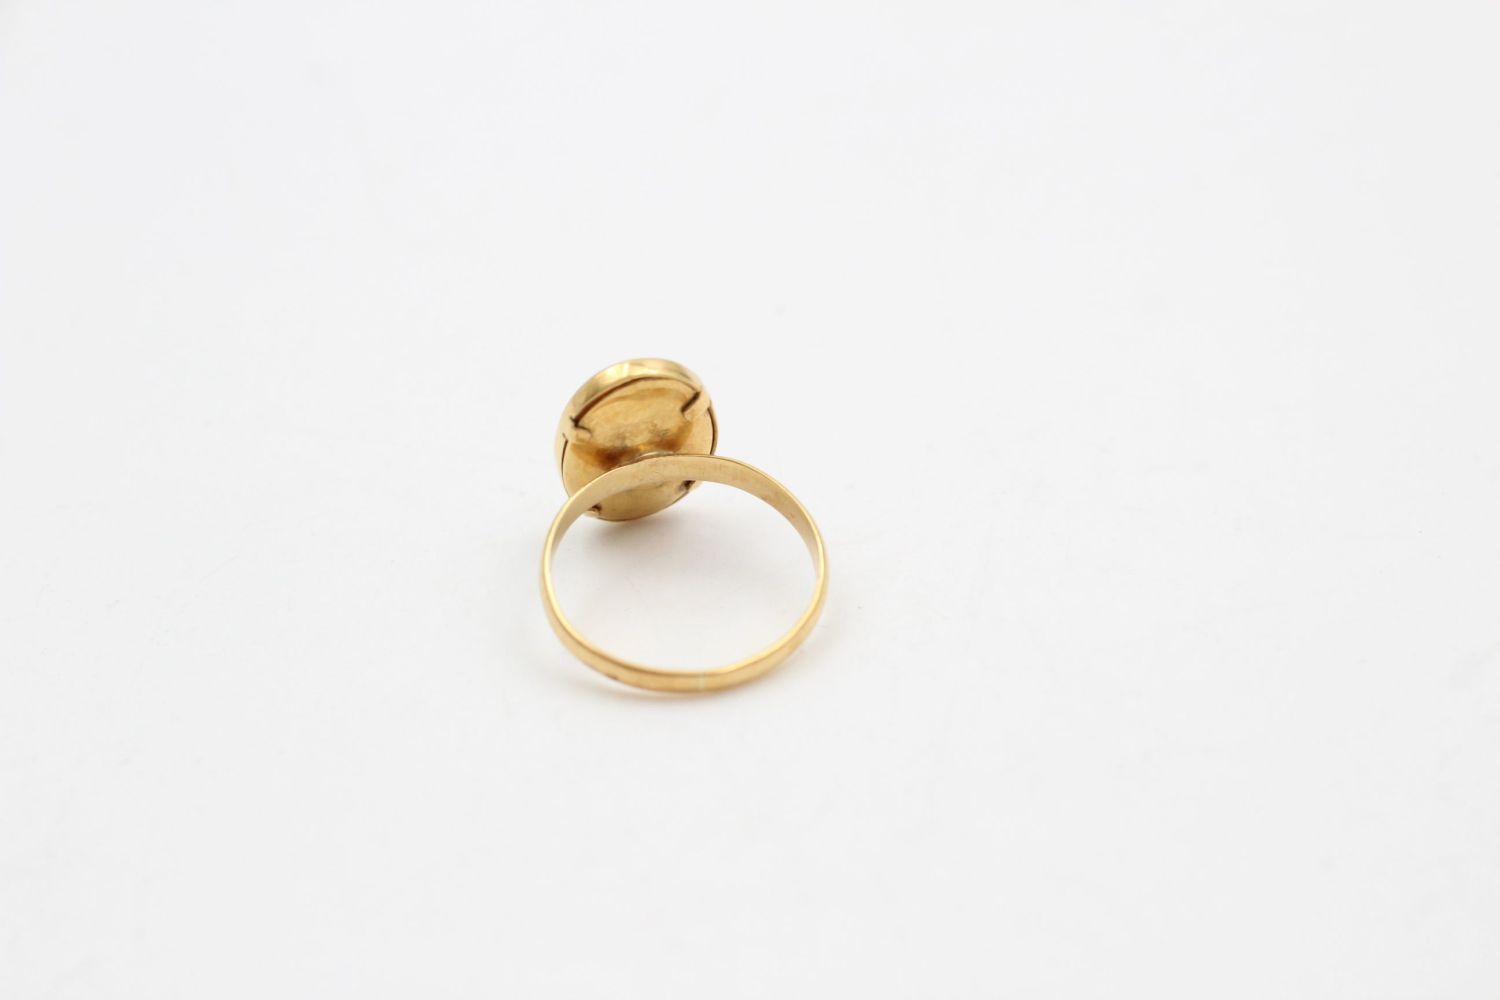 18ct Gold frame shell cameo ring 2.2 grams gross - Image 4 of 4